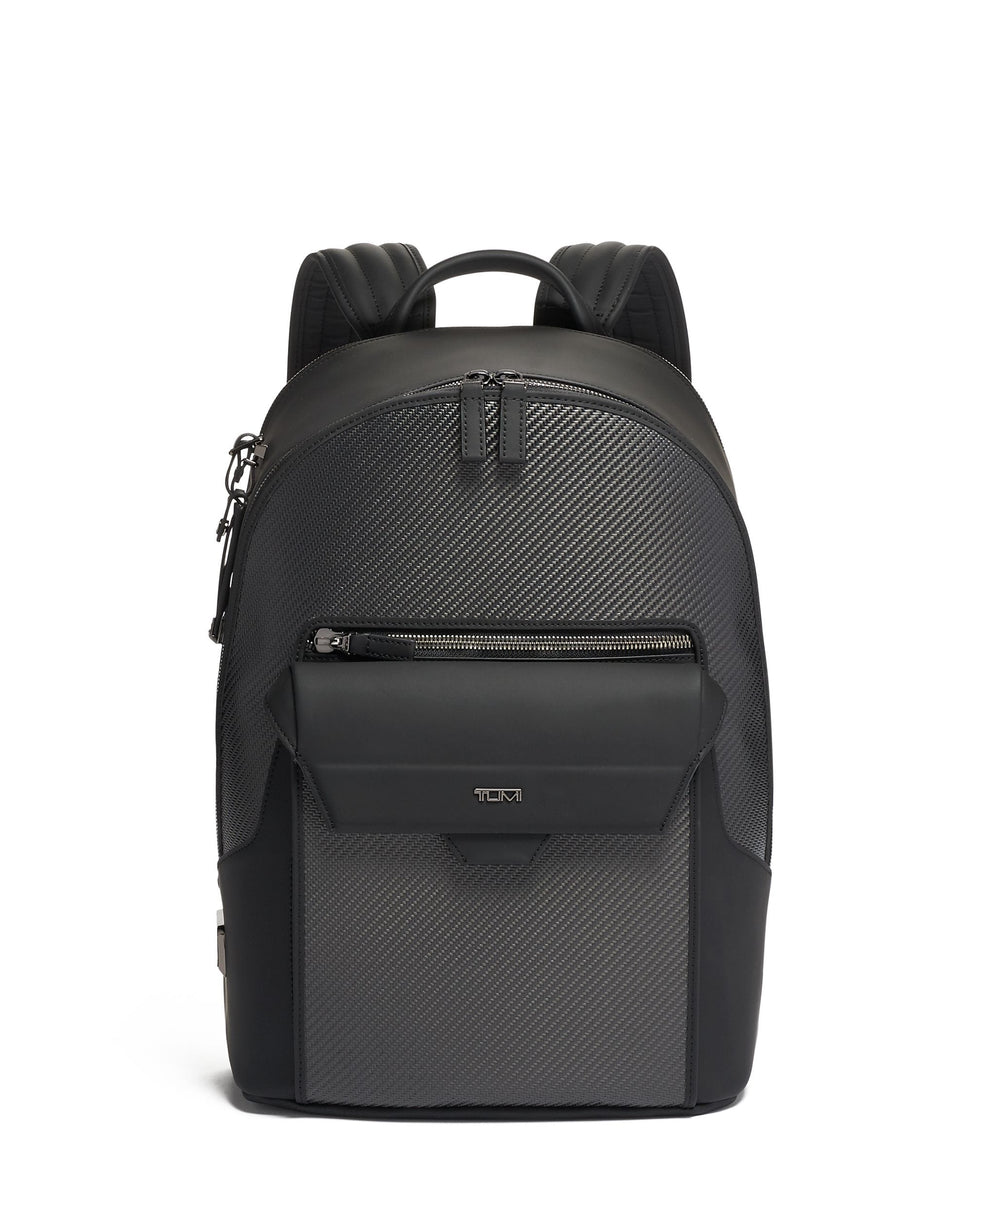 Marlow Backpack Ashton Collection